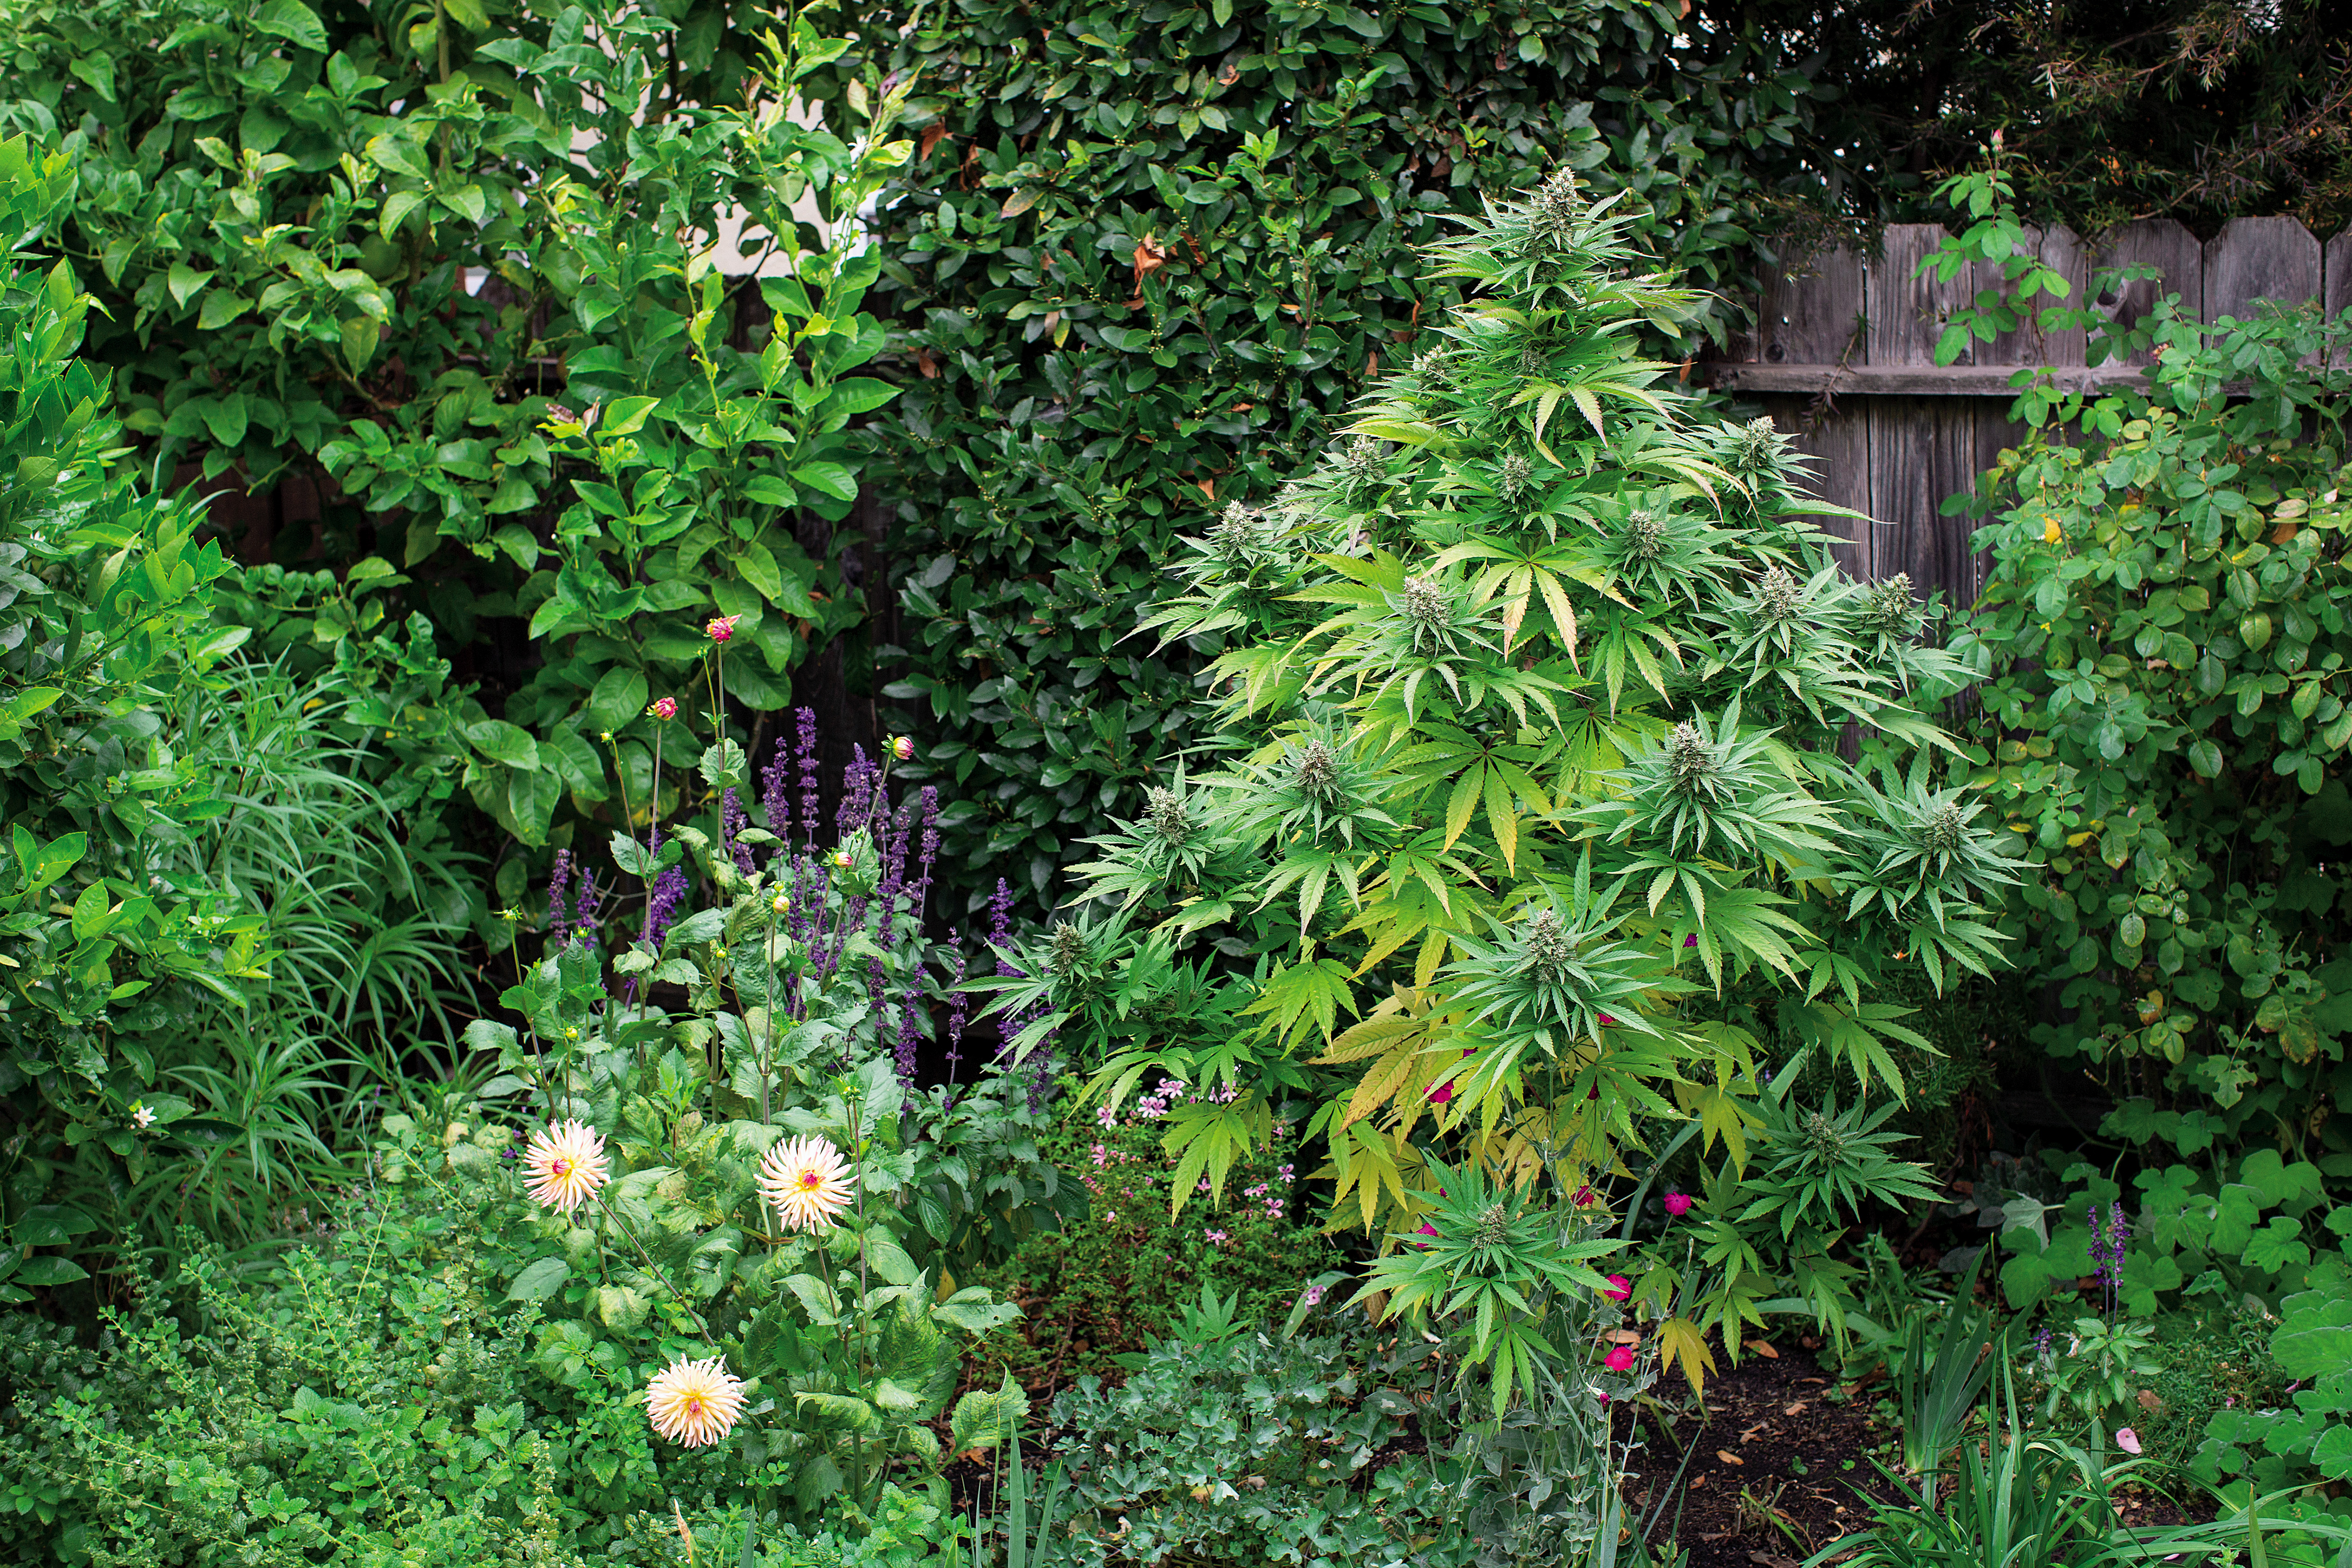 From seed to plant: How to grow your four legal cannabis plants